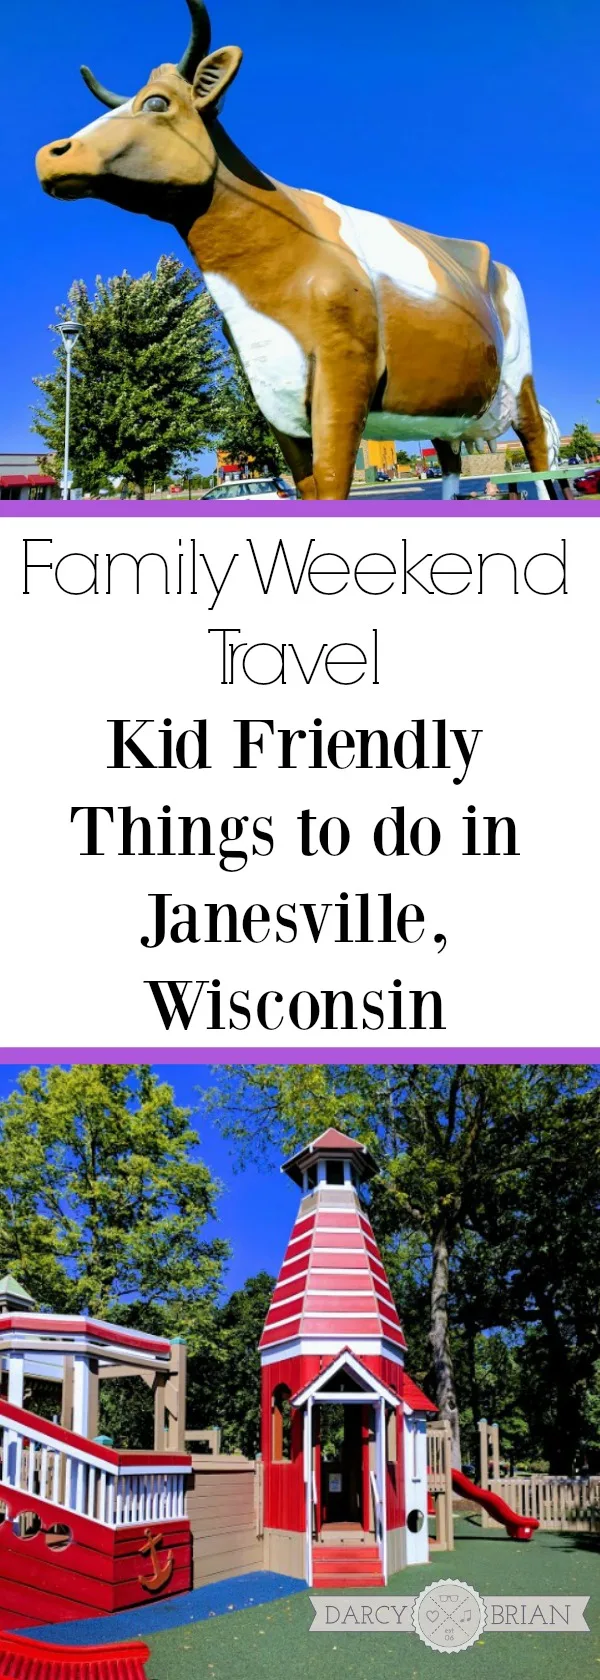 Looking for an affordable family weekend destination? These Kid Friendly Things to Do in Janesville, Wisconsin are great for your family travel itinerary. There are lots of fantastic places to visit in the Midwest with your family. Find places to see, eat, and stay during 48 hours in Janesville.